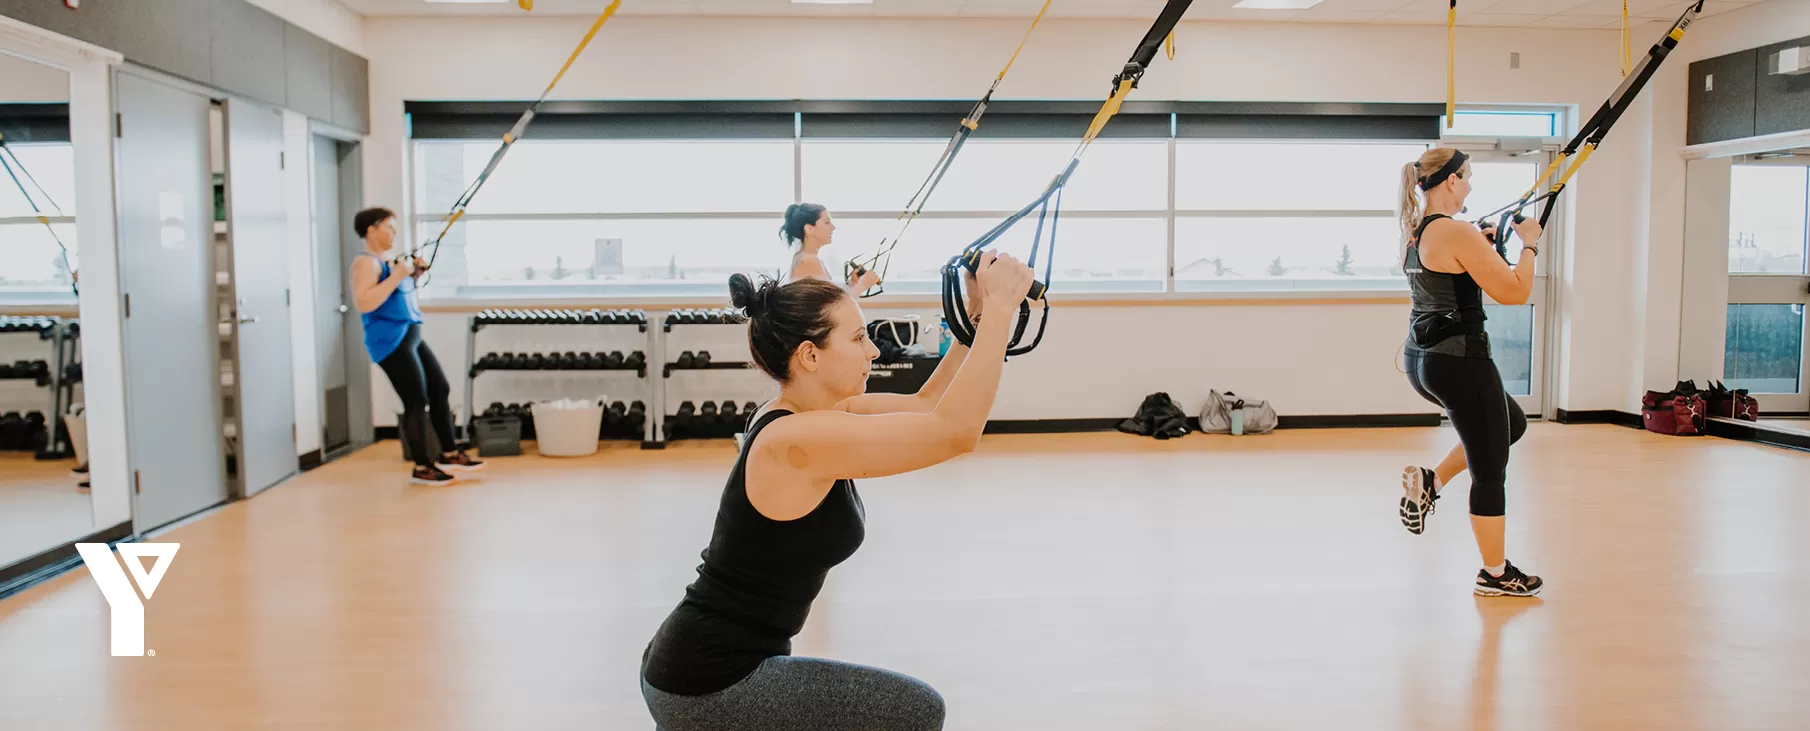 A small group fitness class uses TRX equiptment in a sun-filled studio space.